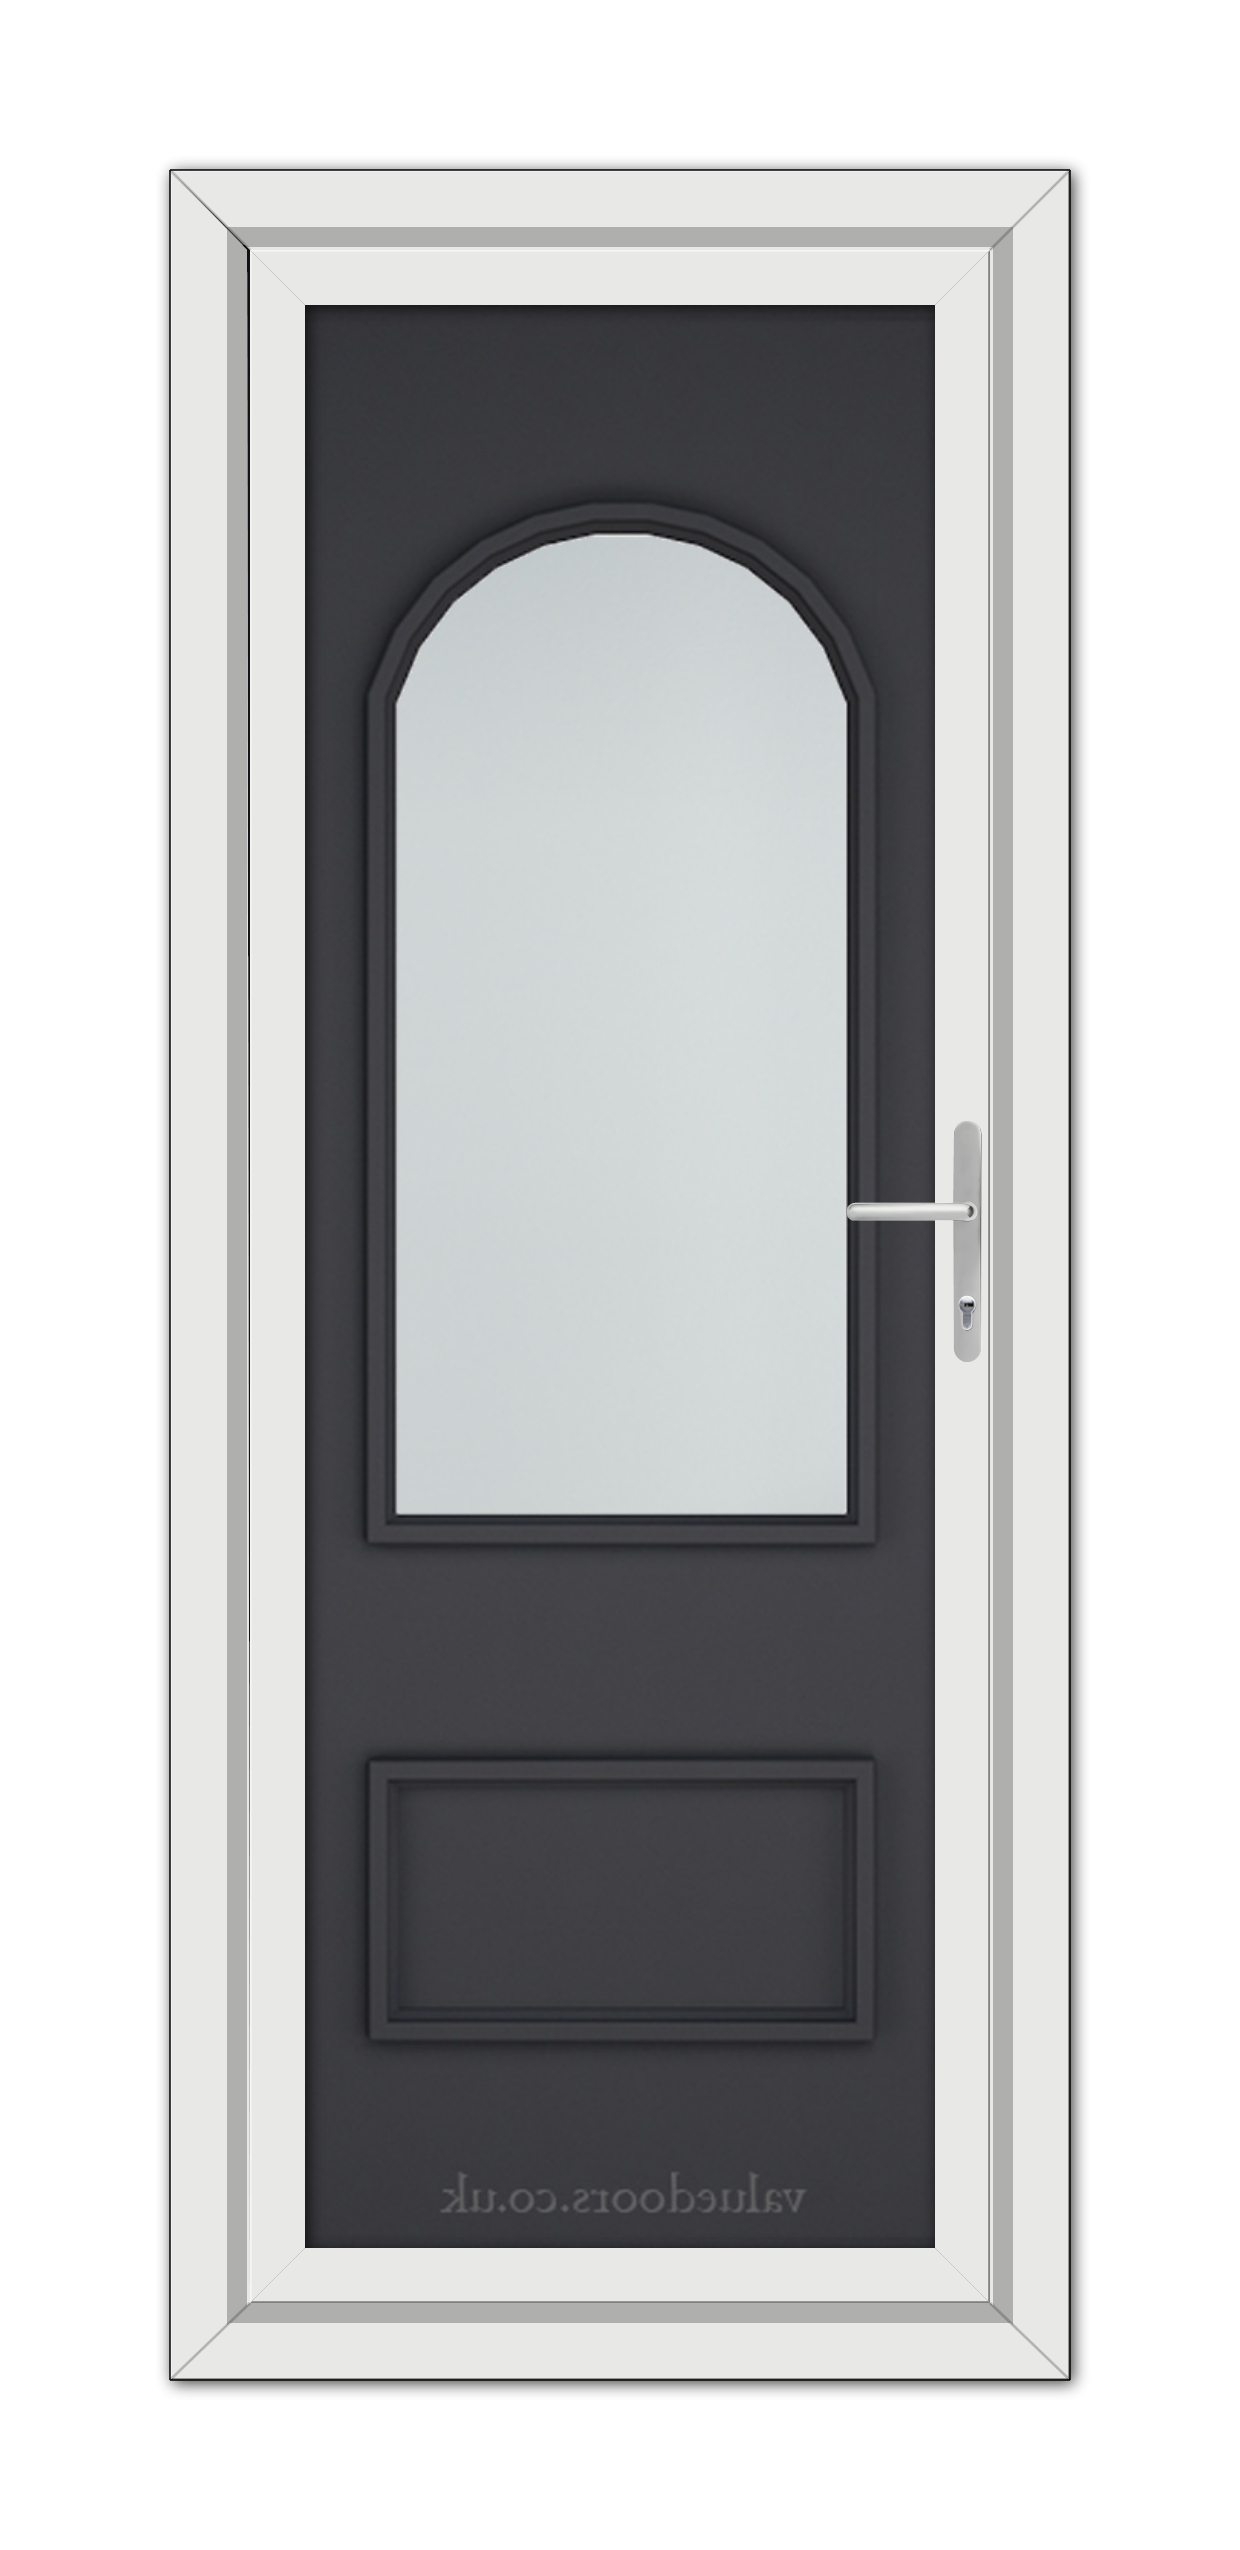 A vertical image of a Grey Rockingham uPVC Door with a white frame, dark gray inset, and a long, oval glass window.